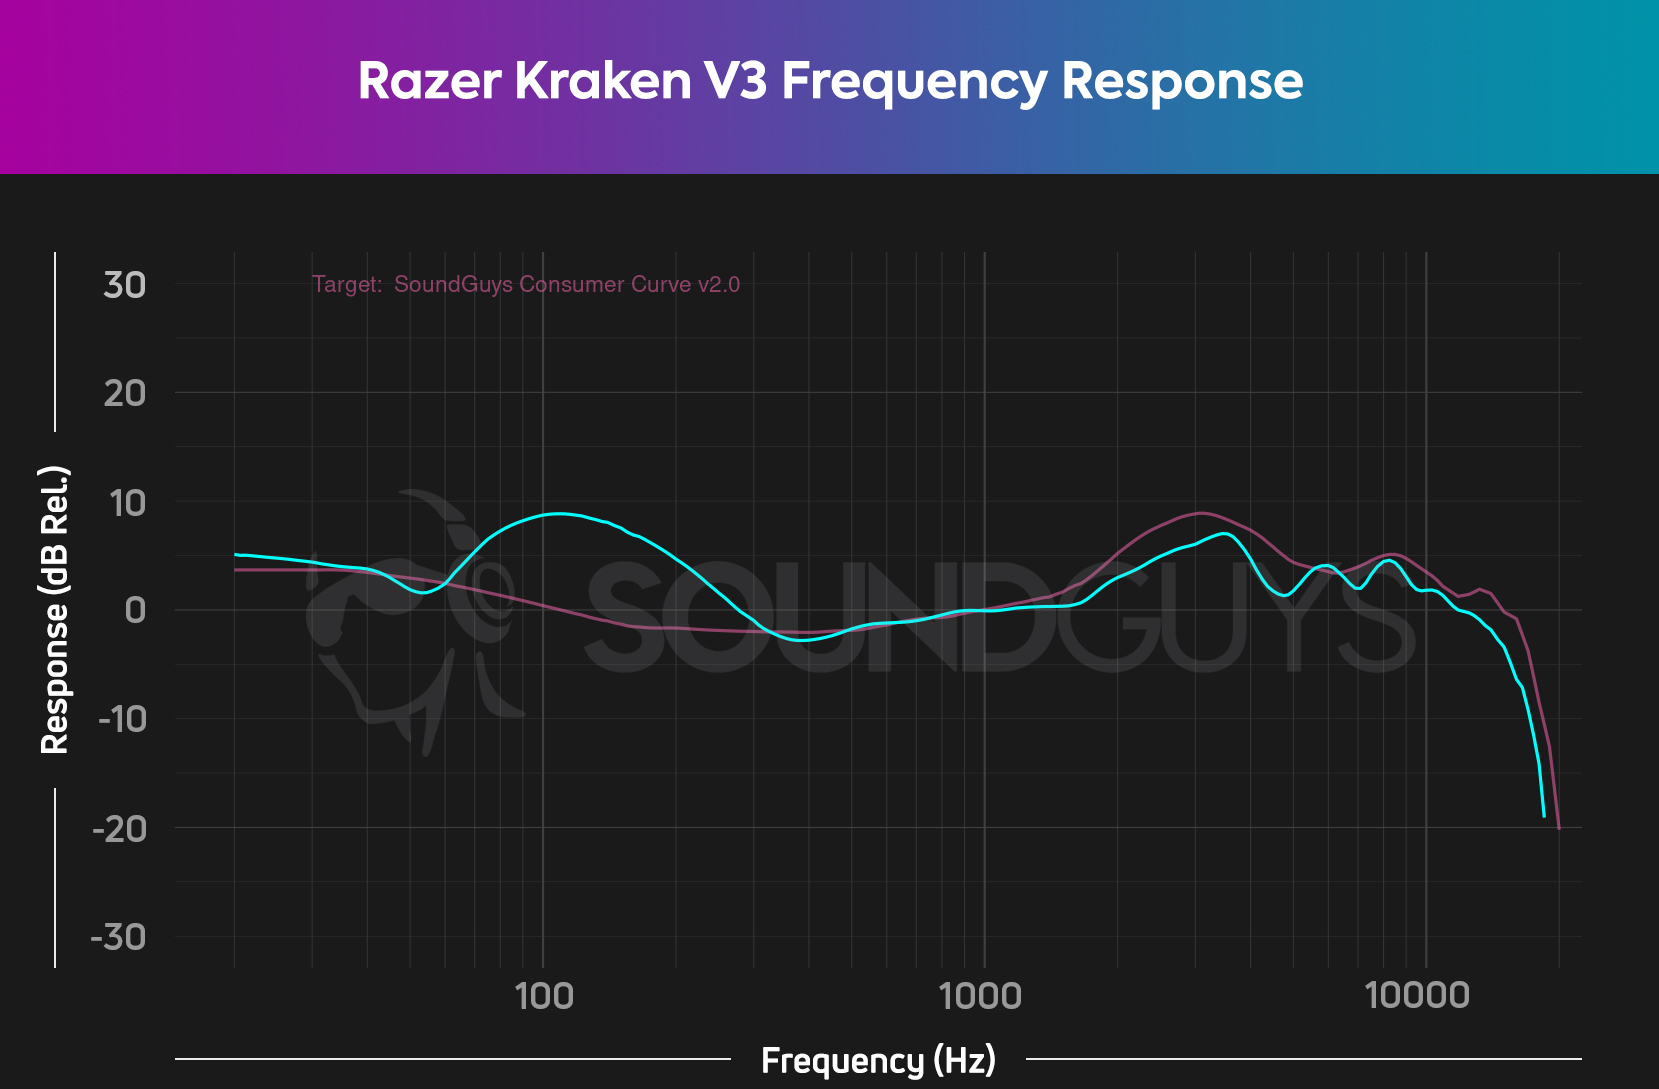 The frequency response chart for the Razer Kraken V3 (cyan) compared to our consumer curve V2 (pink).